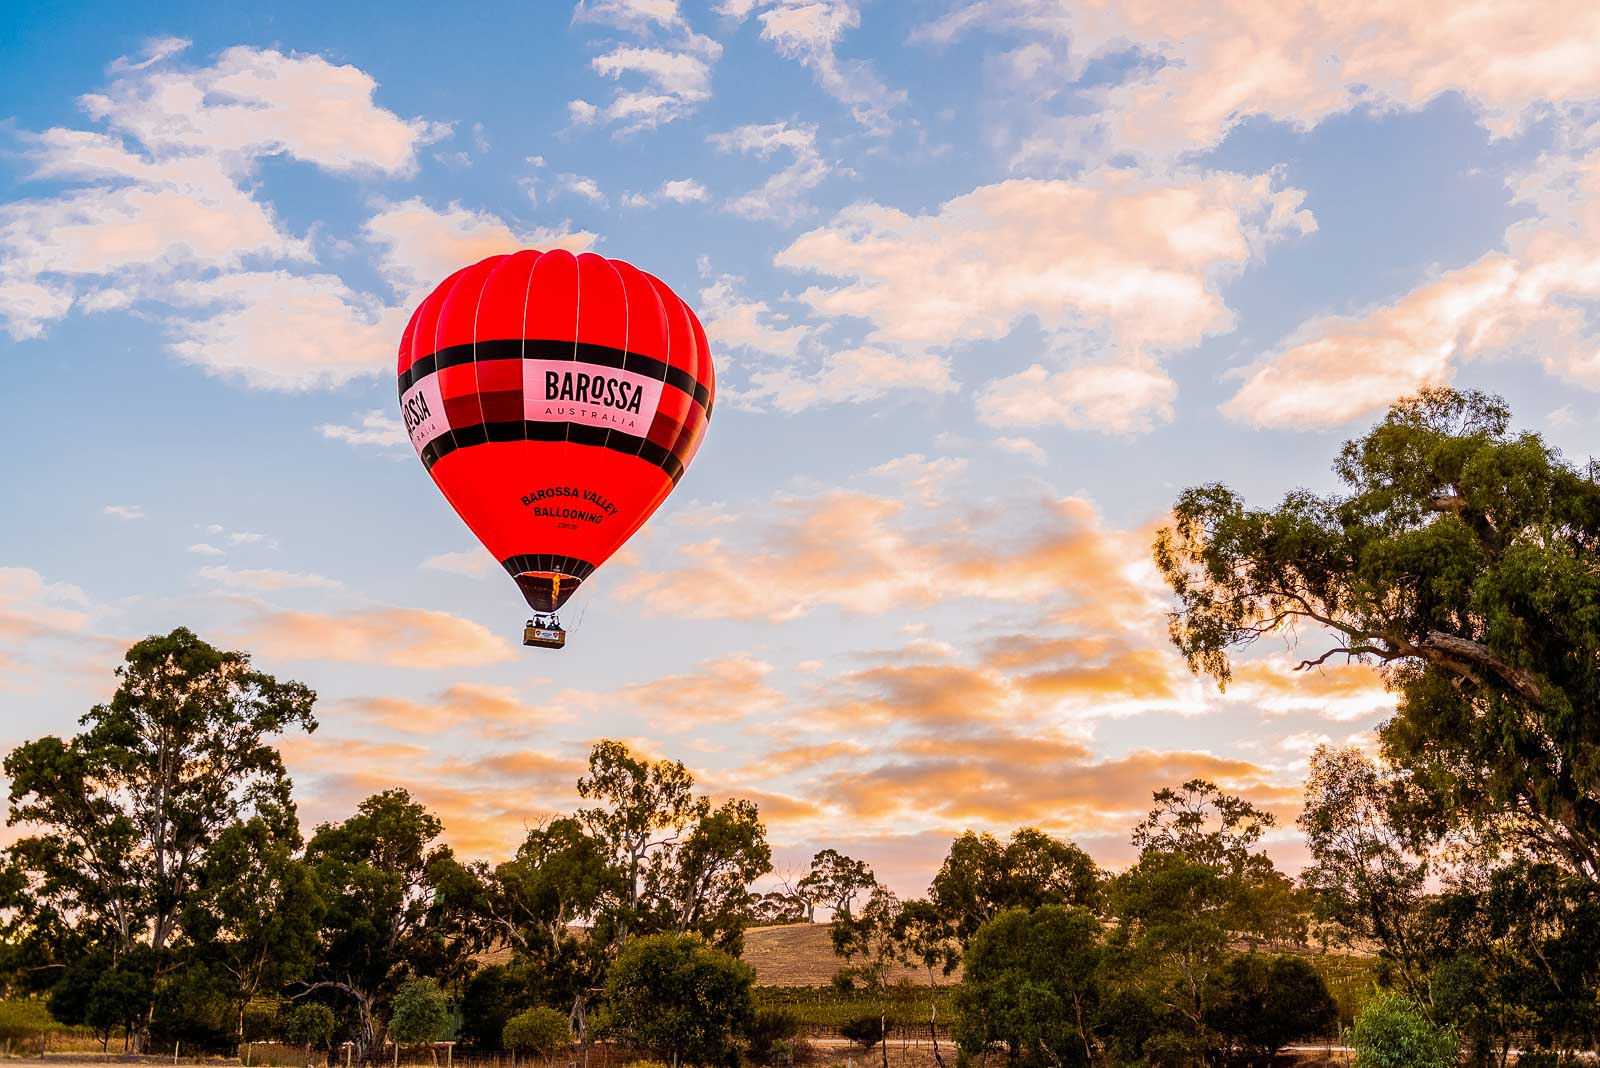 A Weekend Guide To The Barossa Valley